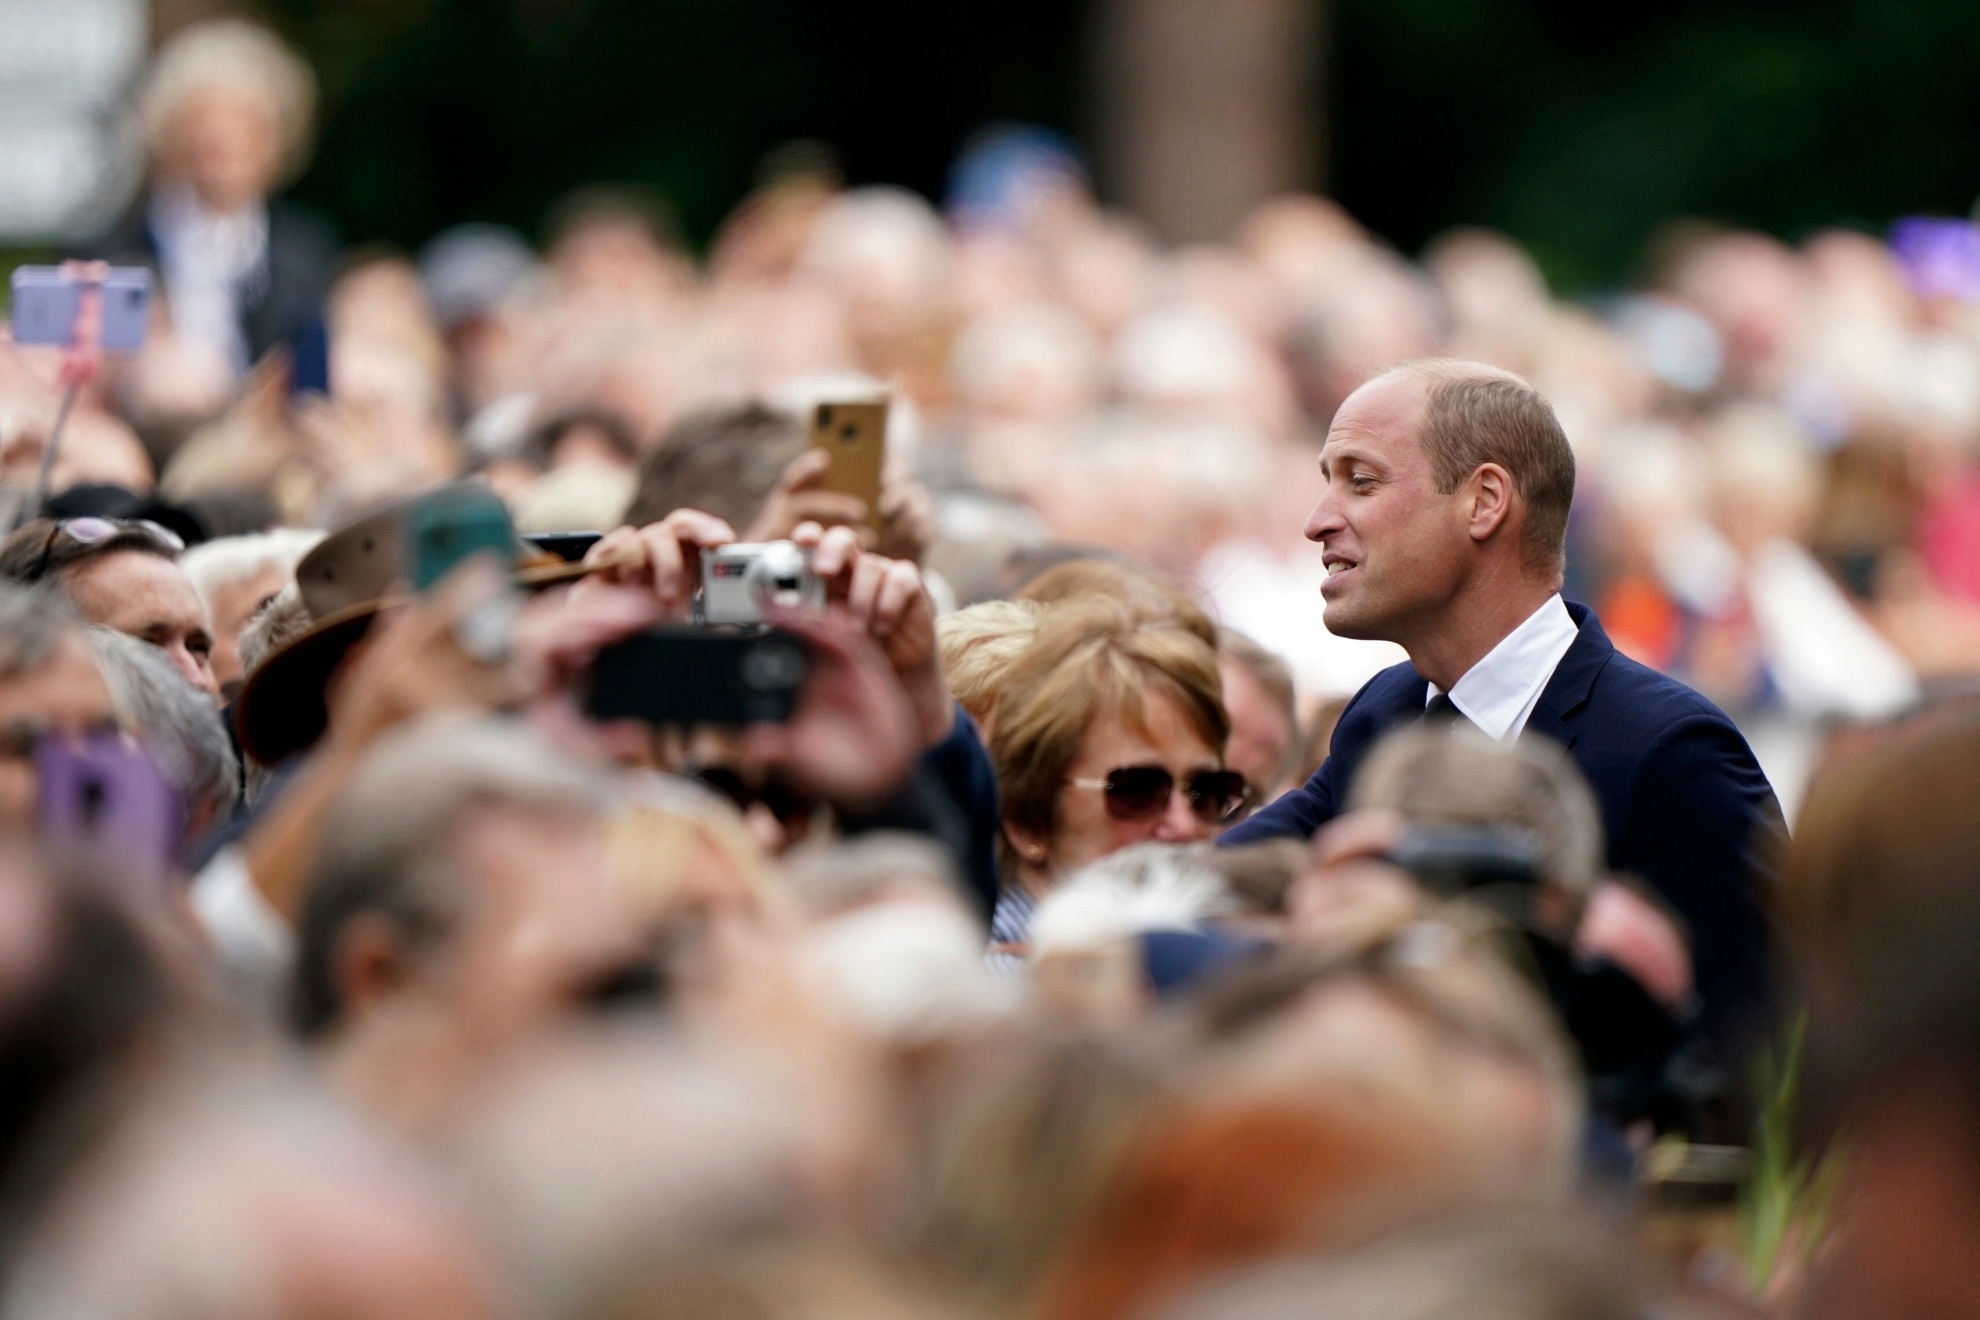 'Big Willy', 'Baldy', and other nicknames between Prince William and Kate Middleton